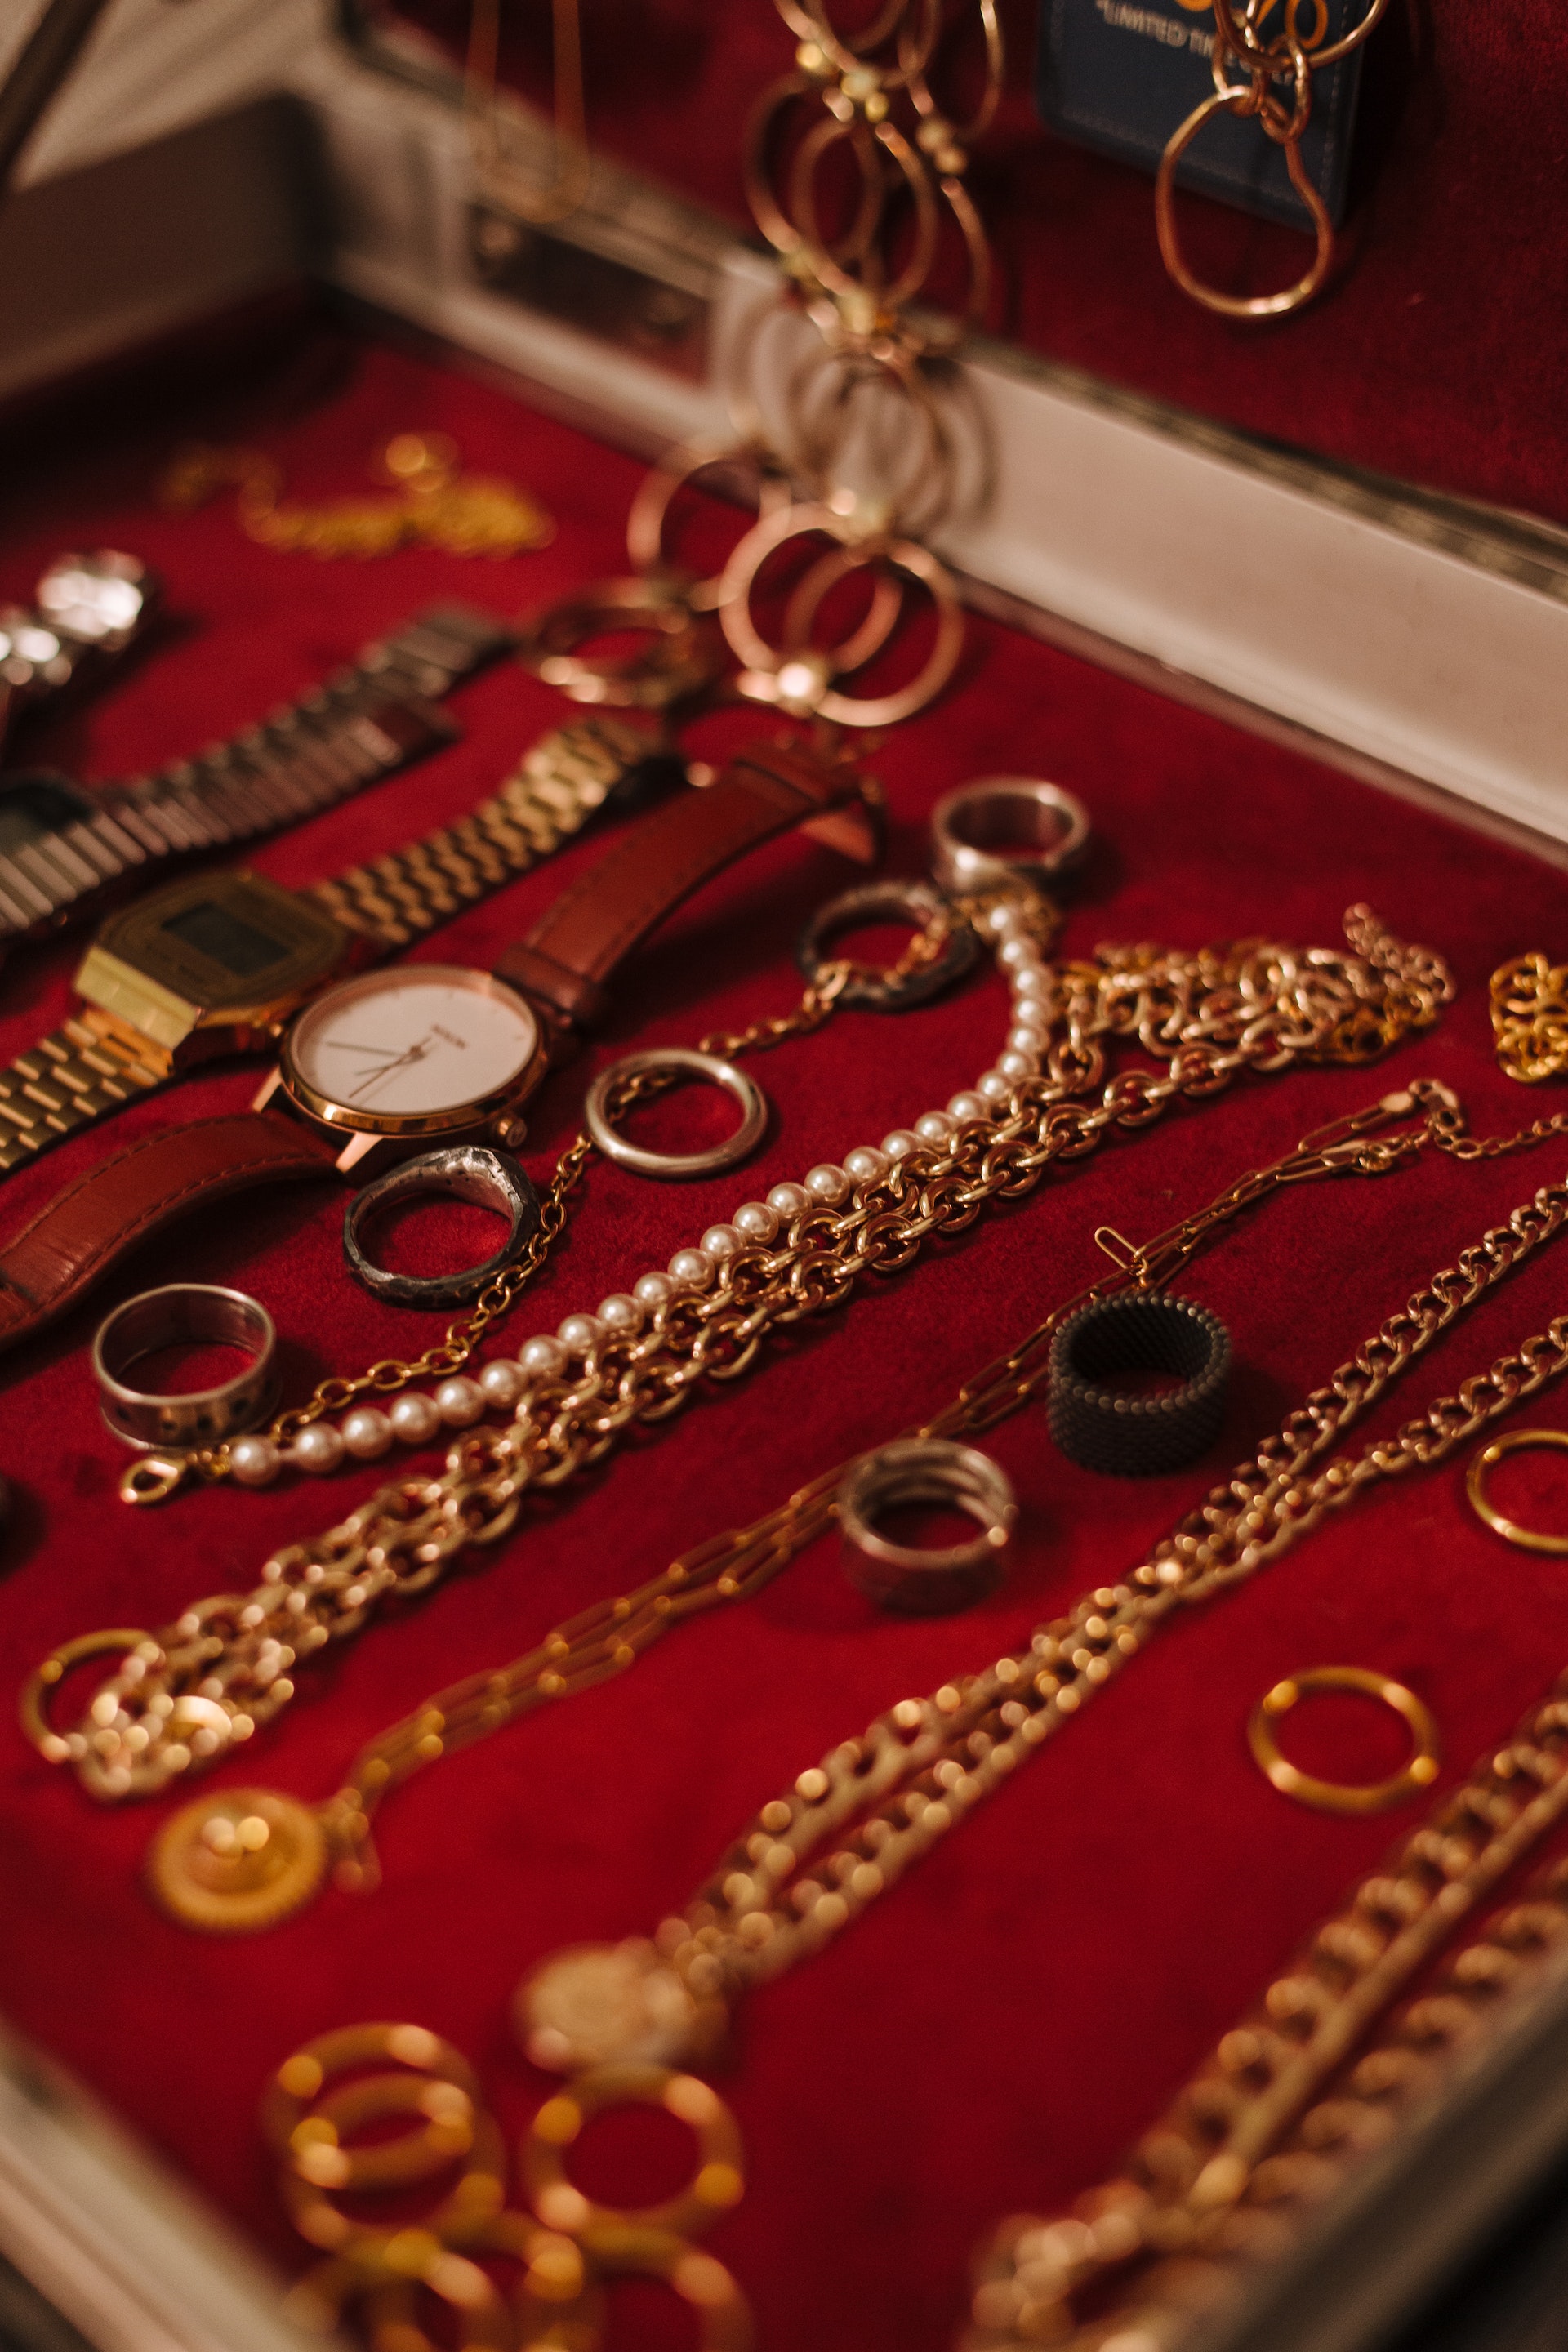 A variety of jewelry | Source: Pexels